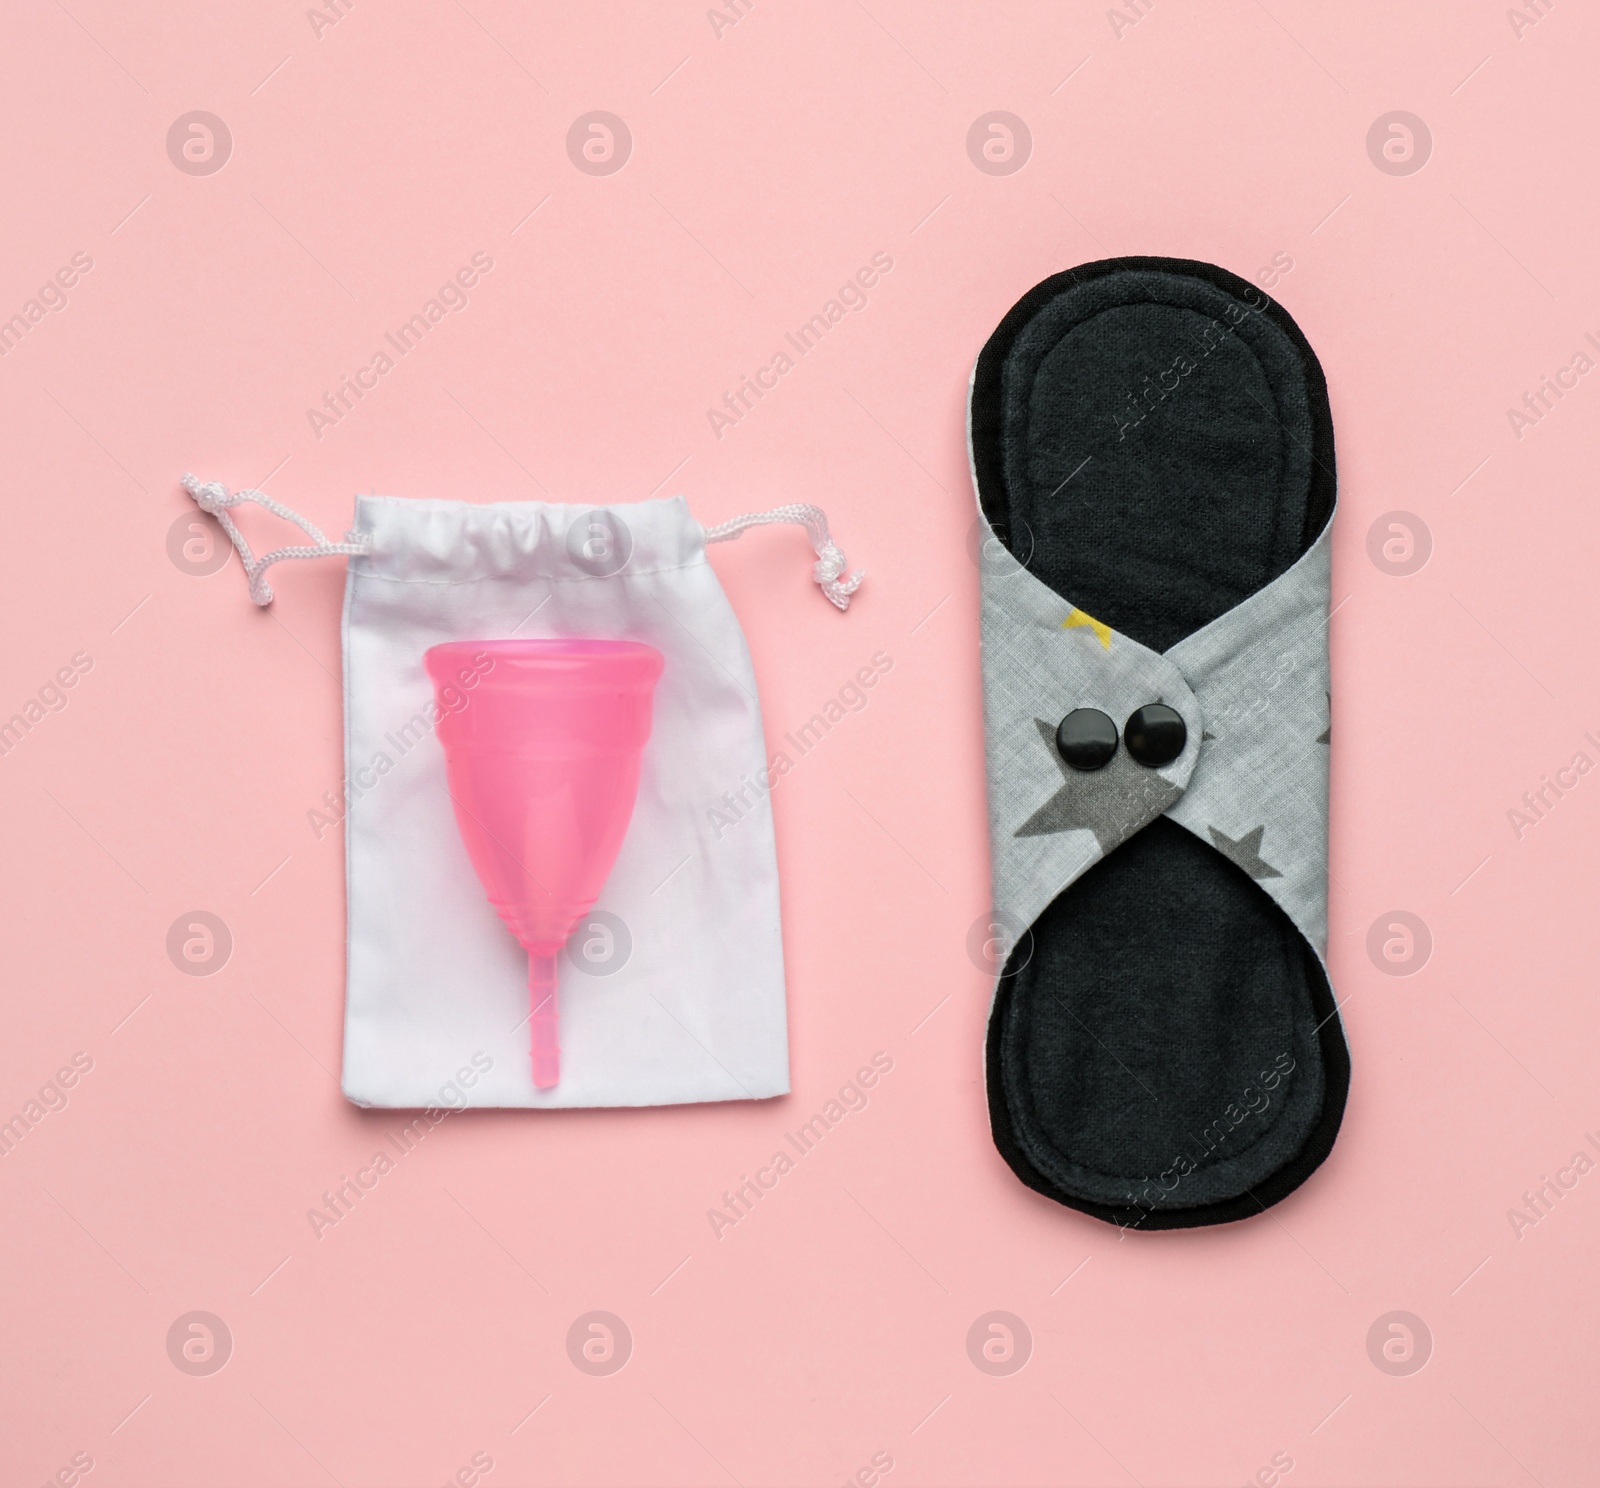 Photo of Reusable cloth pad and menstrual cup on pink background, flat lay